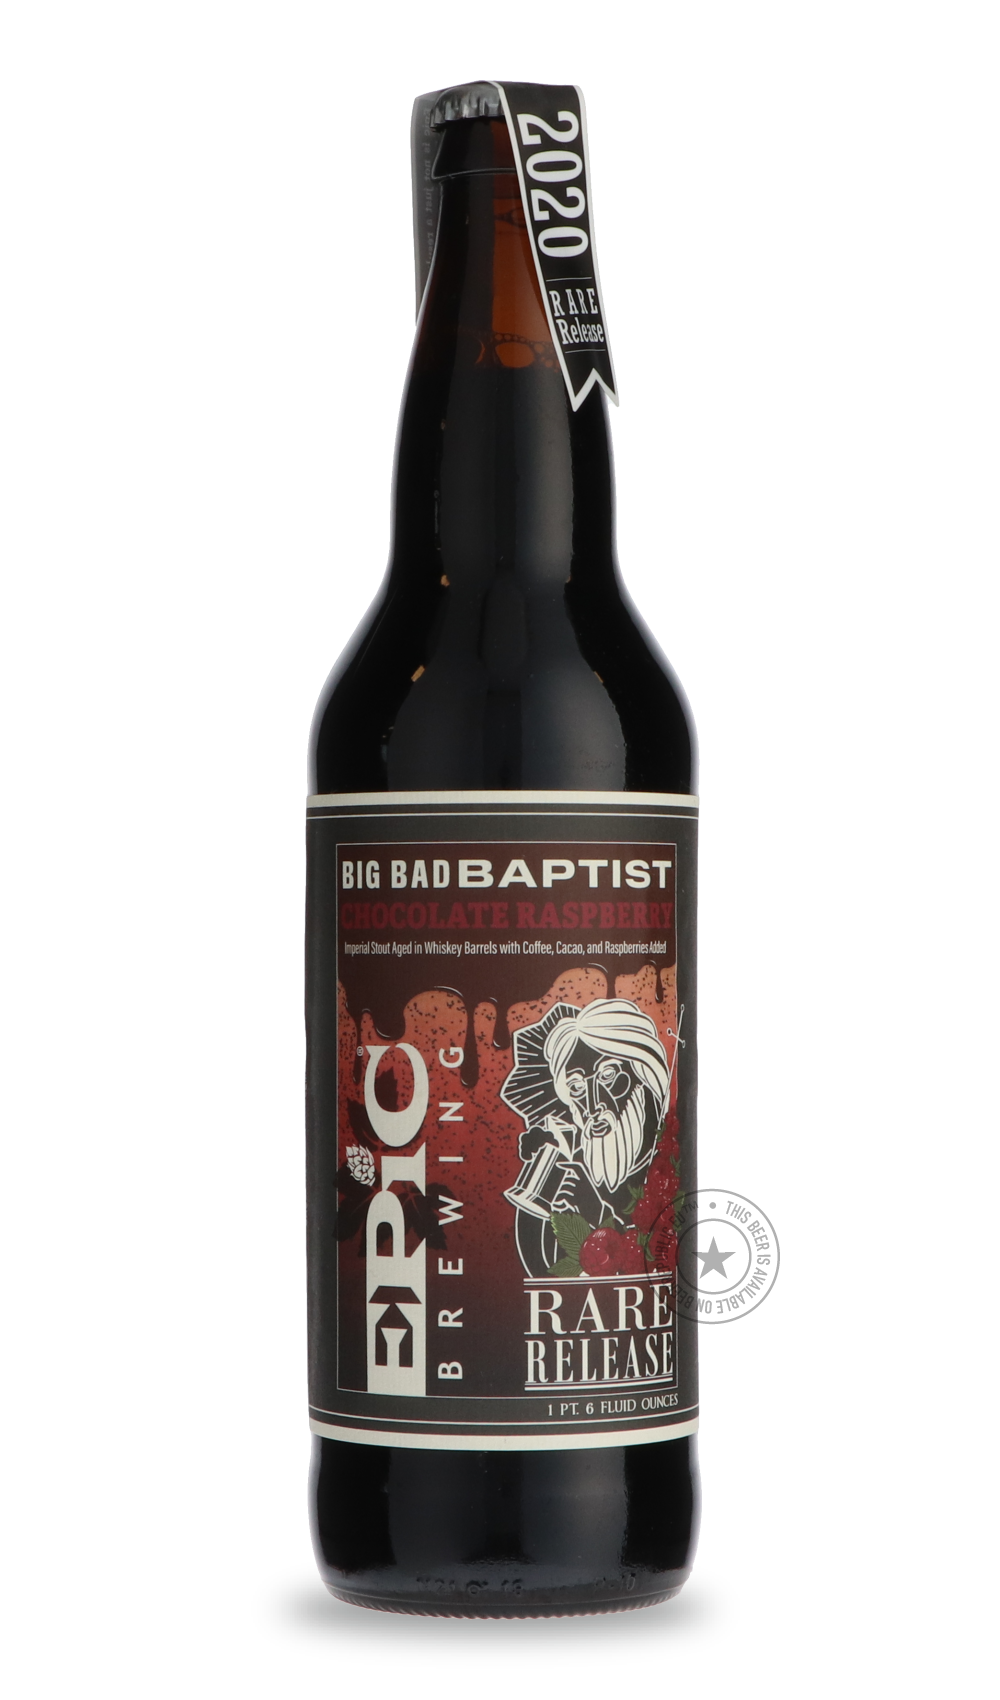 -Epic- Big Bad Baptist Chocolate Raspberry-Stout & Porter- Only @ Beer Republic - The best online beer store for American & Canadian craft beer - Buy beer online from the USA and Canada - Bier online kopen - Amerikaans bier kopen - Craft beer store - Craft beer kopen - Amerikanisch bier kaufen - Bier online kaufen - Acheter biere online - IPA - Stout - Porter - New England IPA - Hazy IPA - Imperial Stout - Barrel Aged - Barrel Aged Imperial Stout - Brown - Dark beer - Blond - Blonde - Pilsner - Lager - Whea